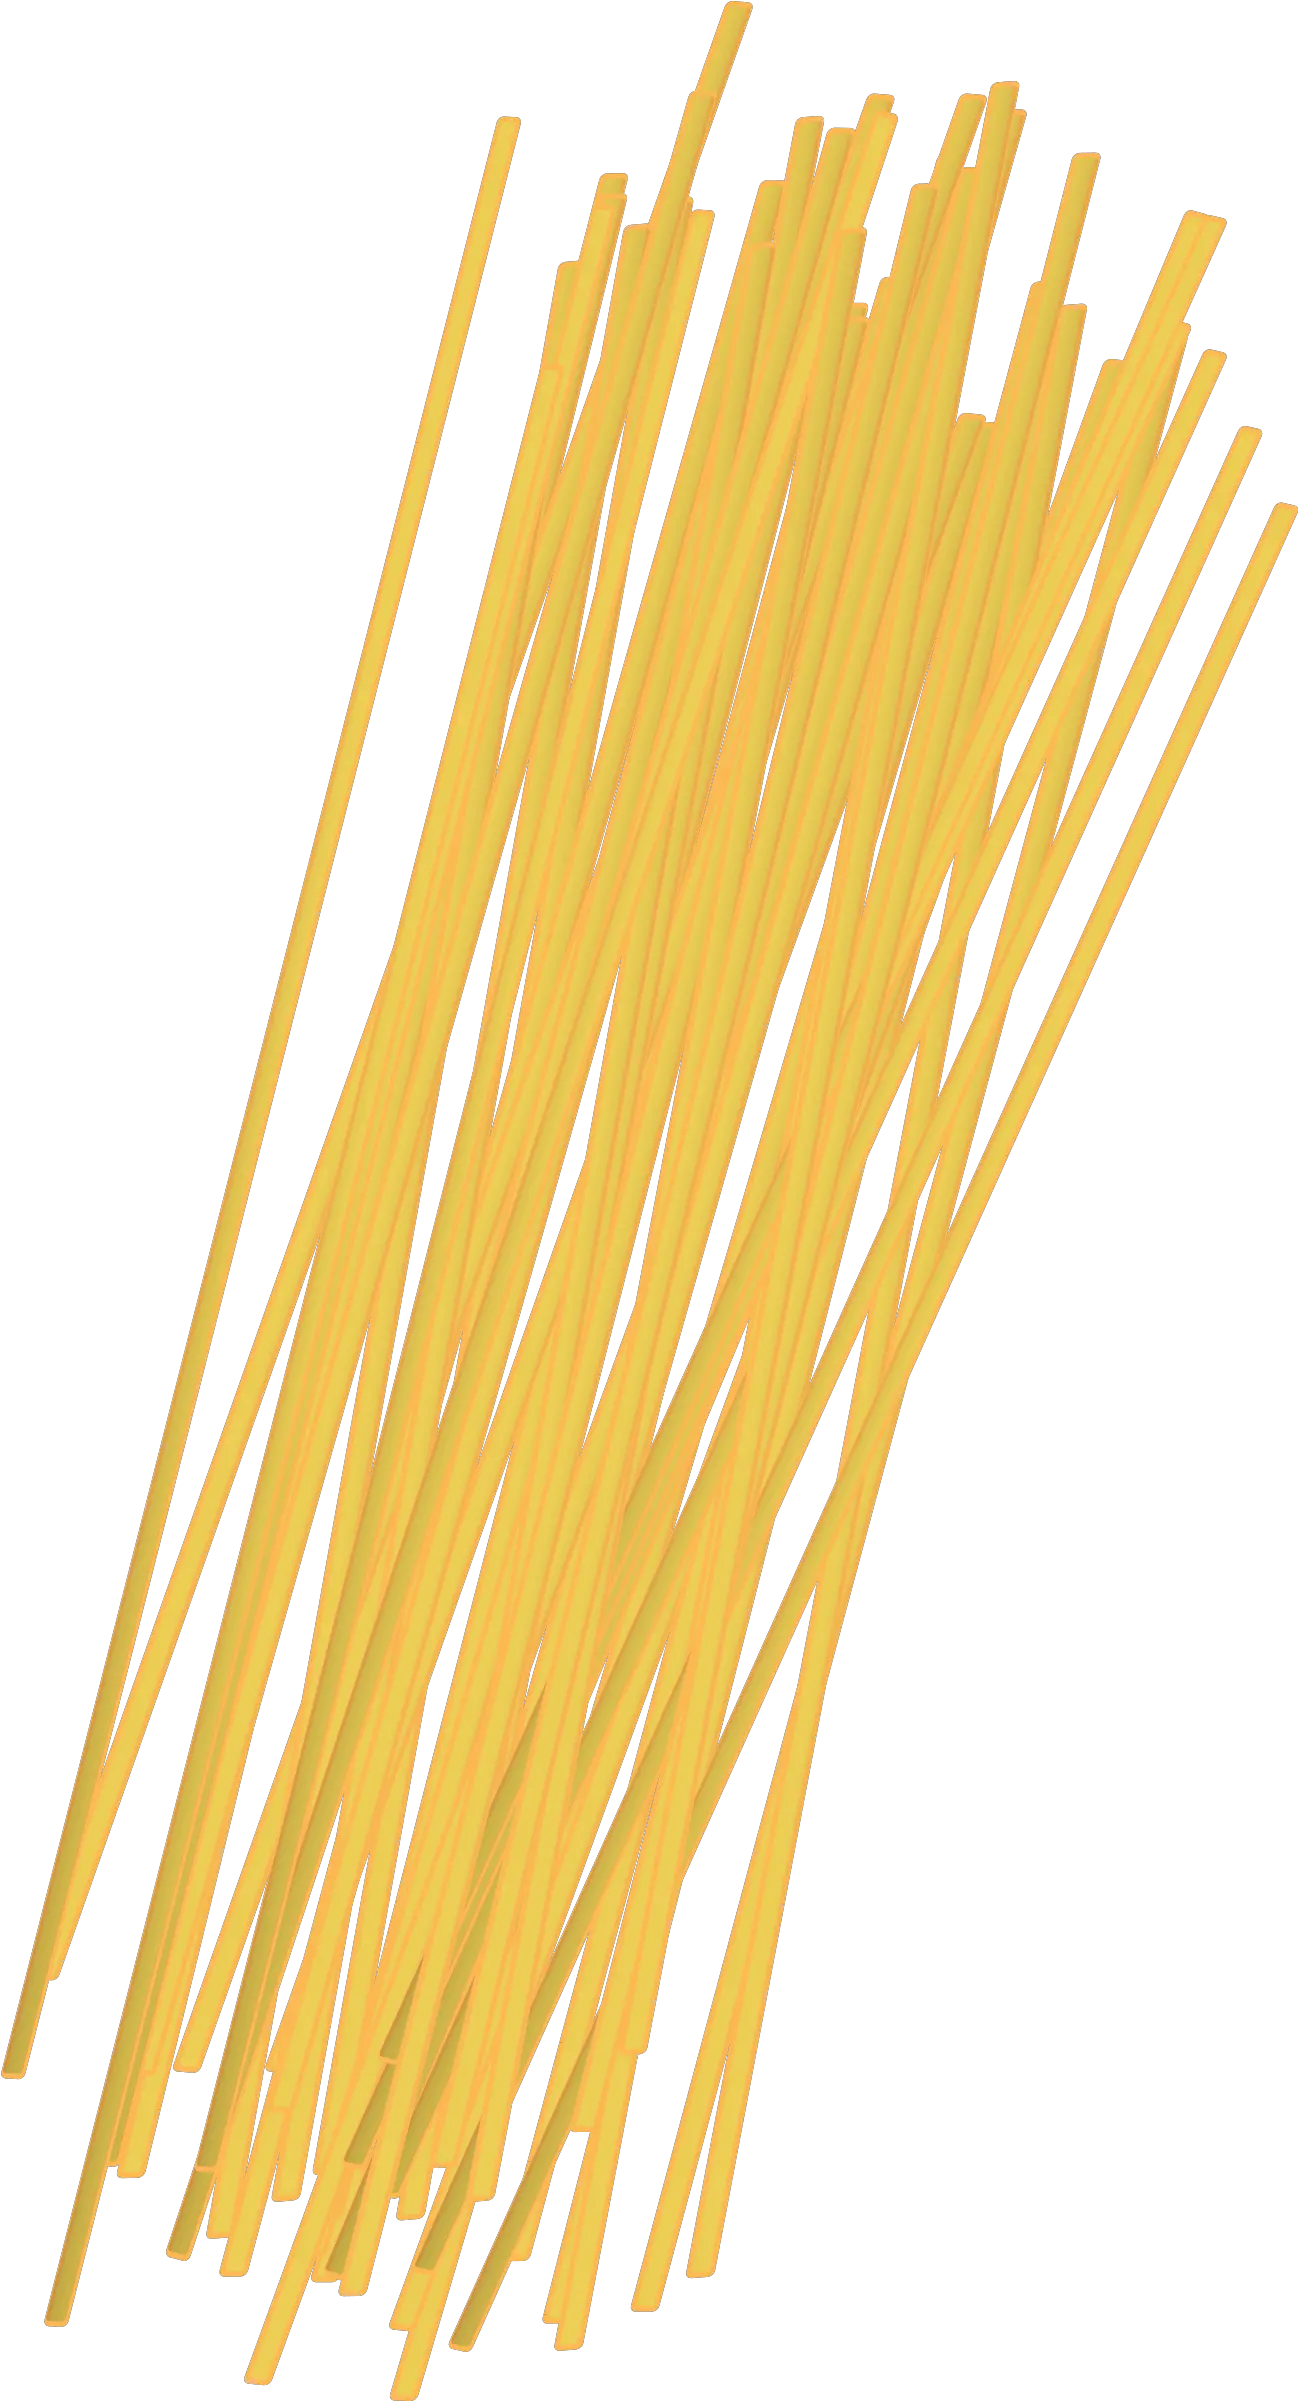 Pasta Png Spaghetti Noodle Pencil And In Color Spaghetti Uncooked Spaghetti Noodle Pasta Png